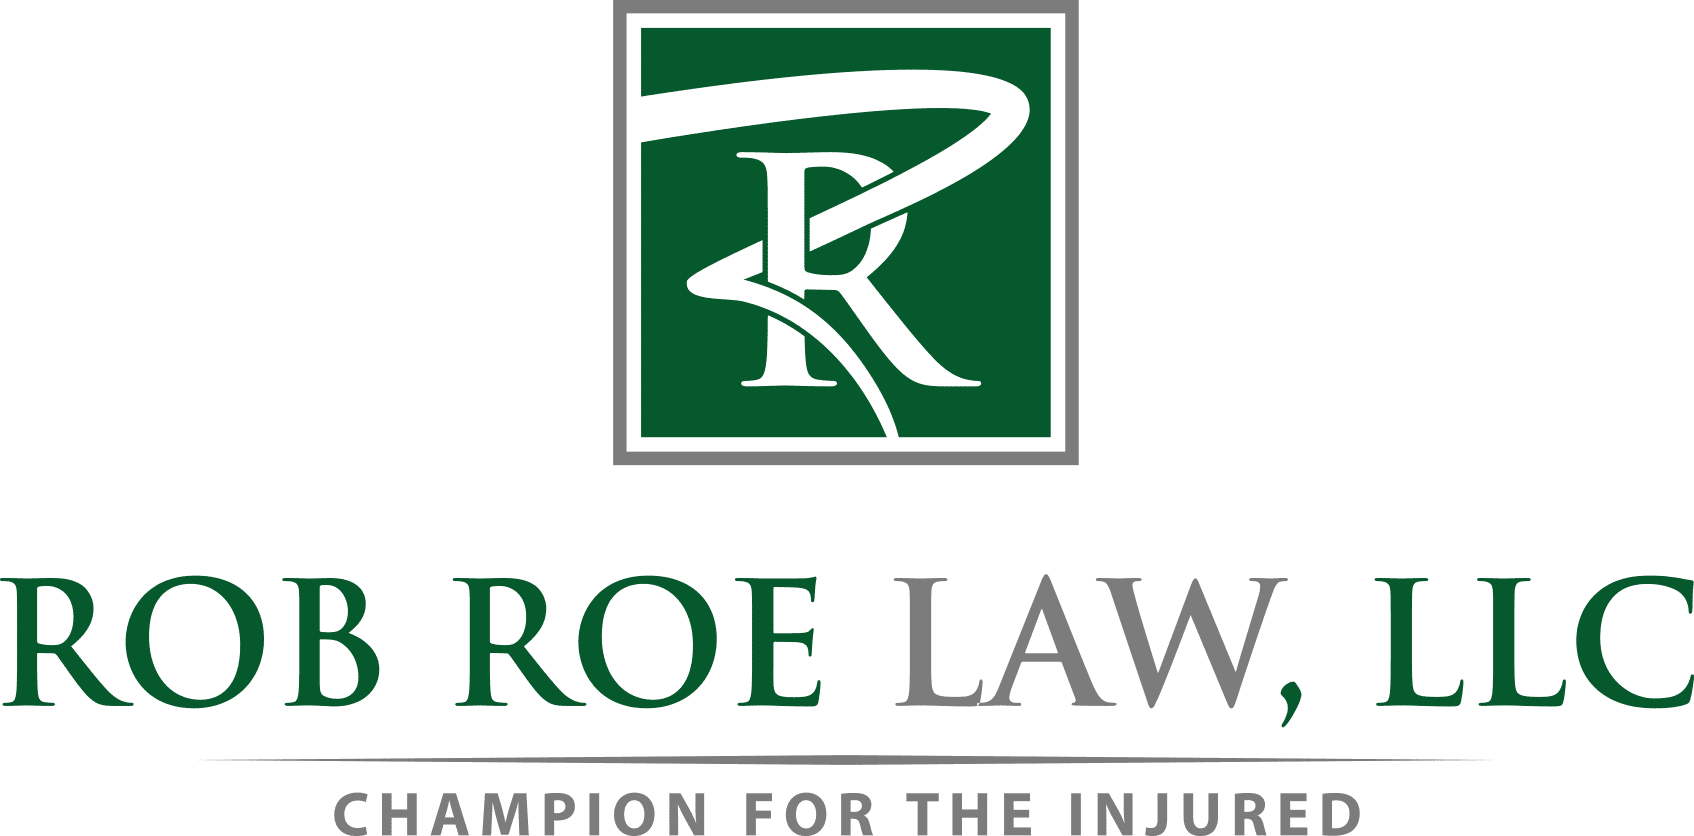 Rob Roe Law, LLC Champion For The Injured